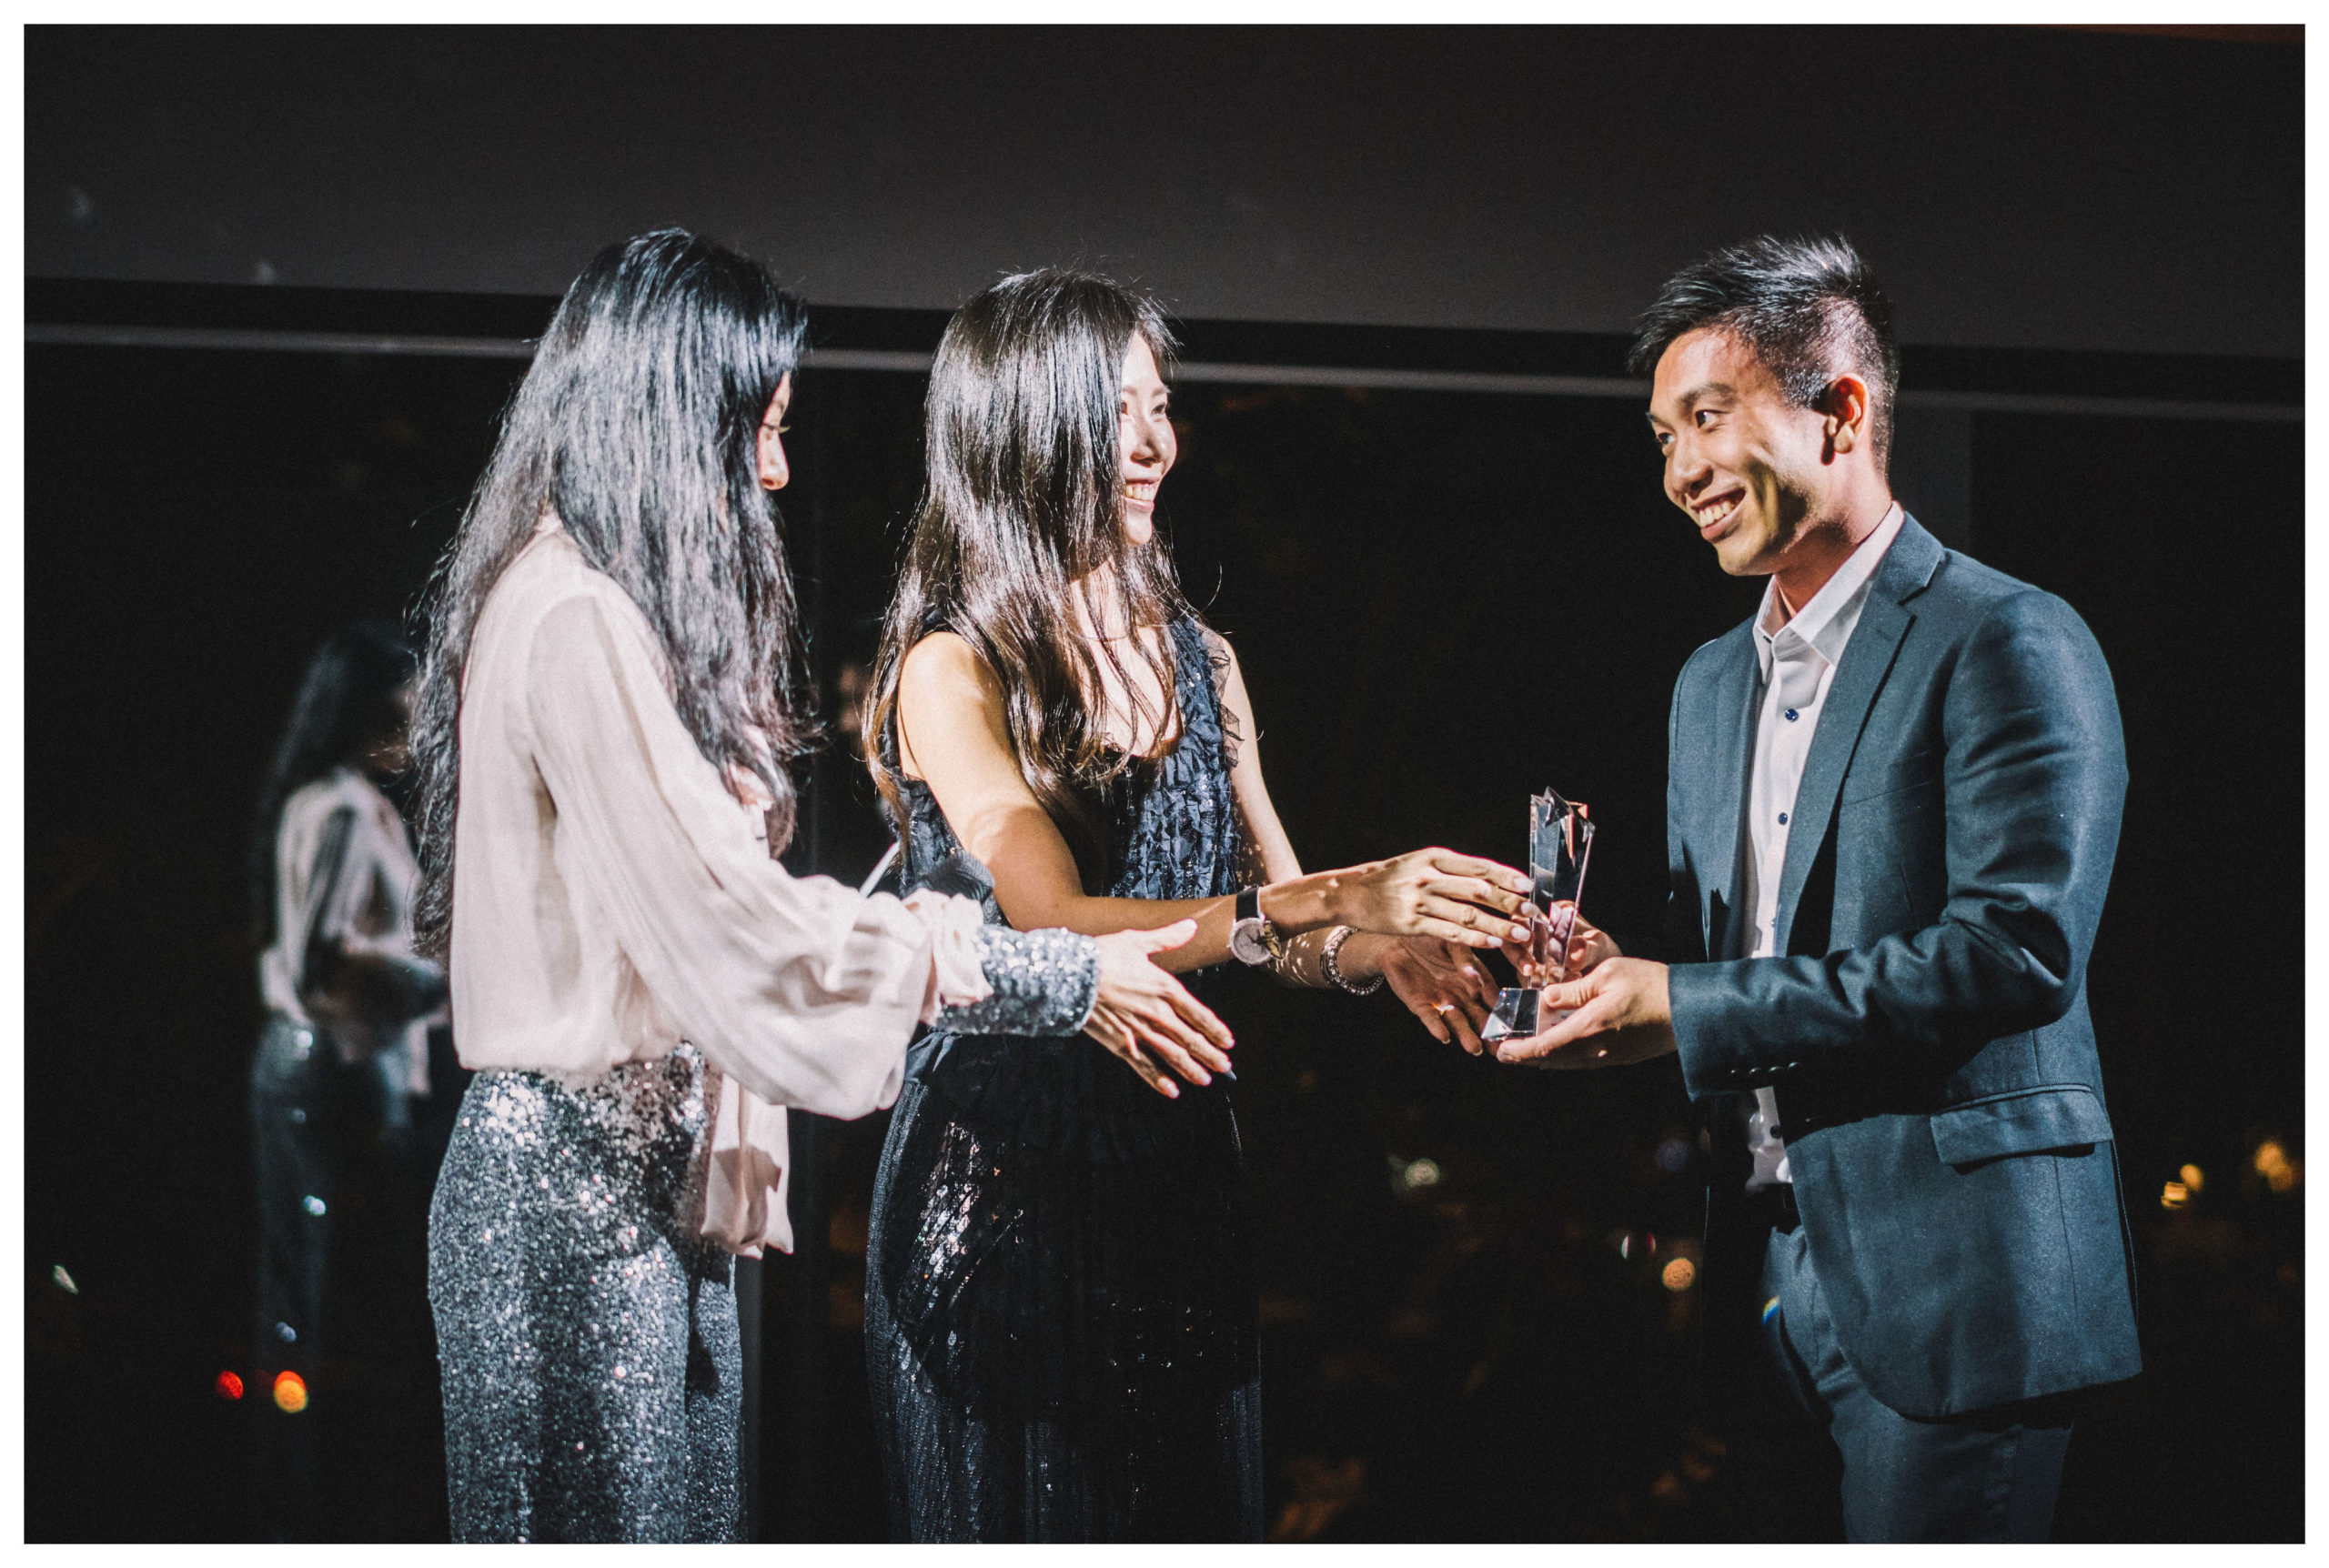 Beh receiving his award as the most innovative